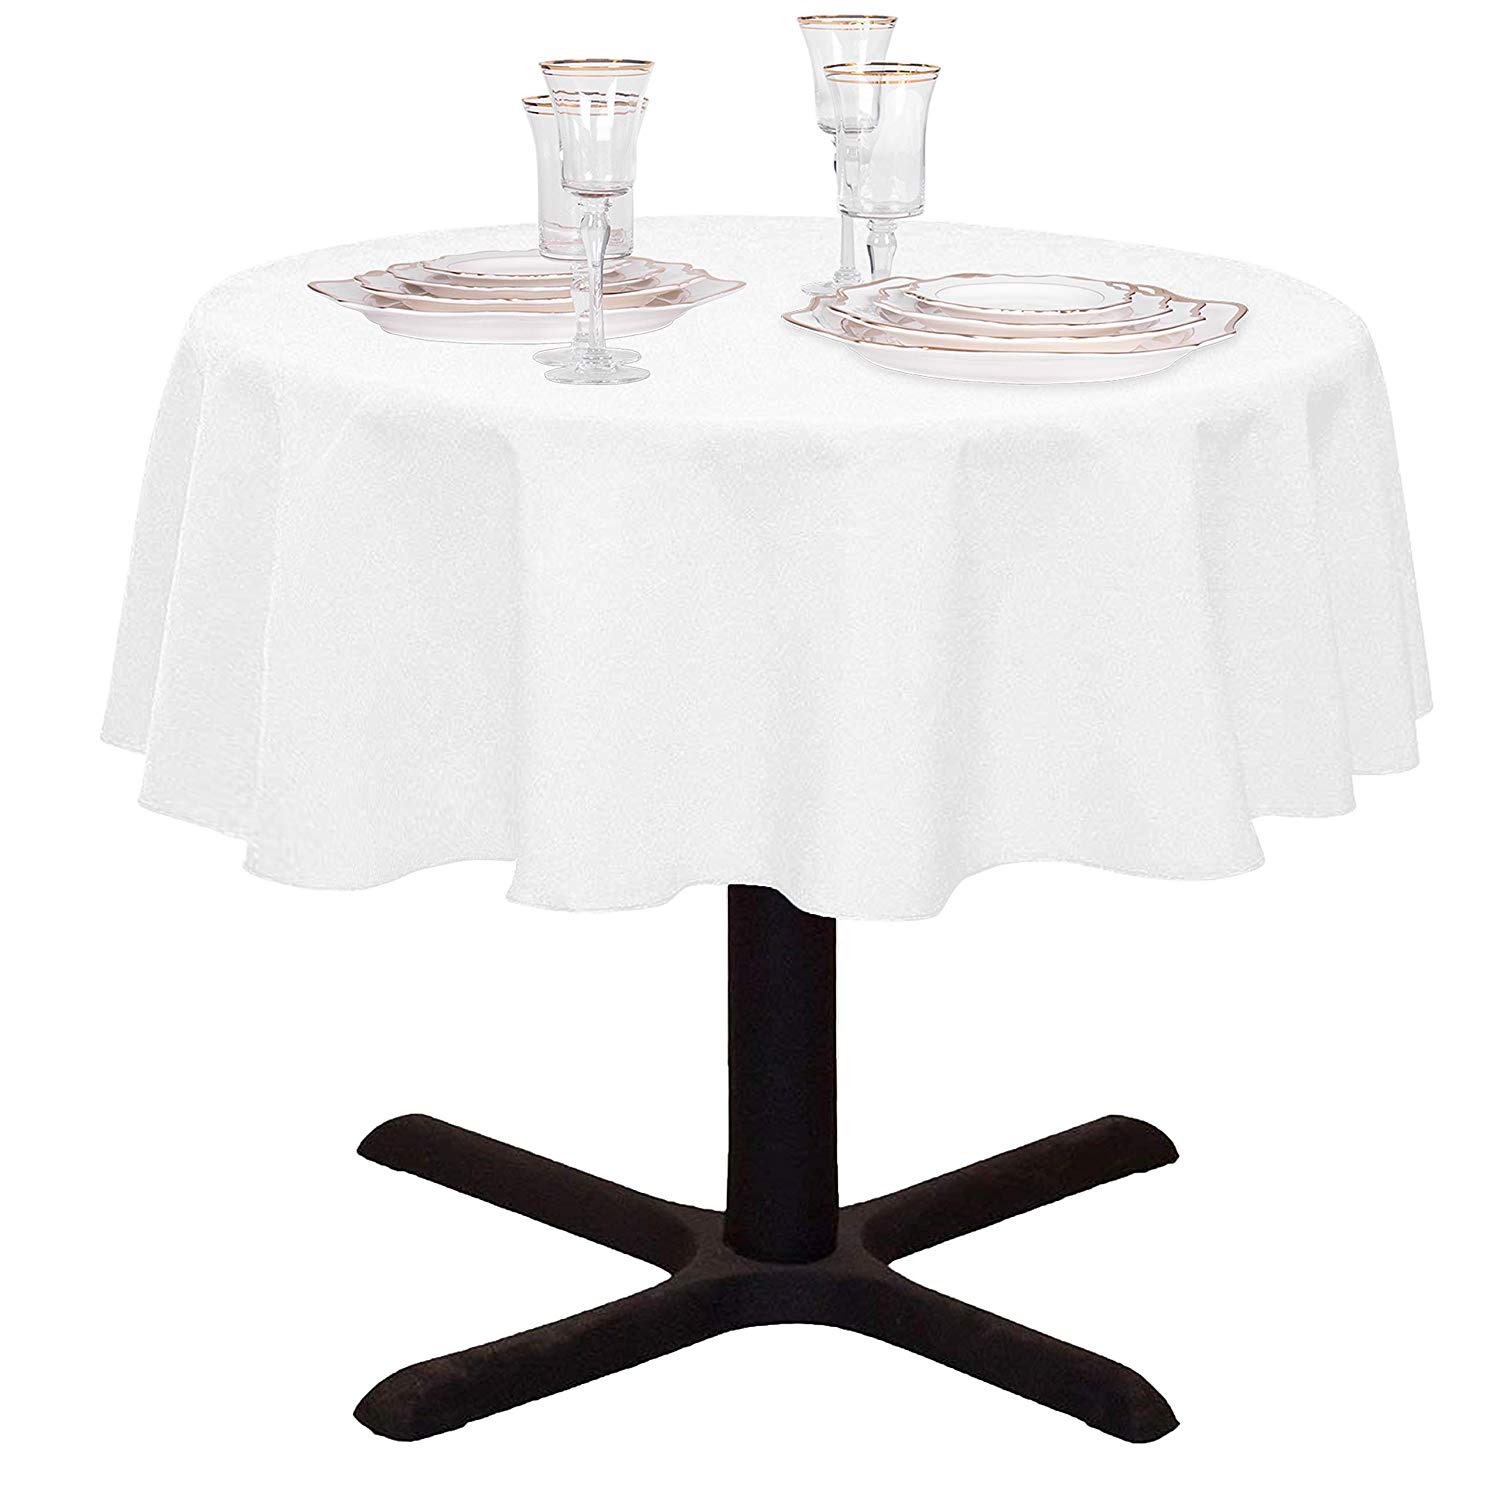 linentablecloth inch round ambassador tablecloth for accent table white home kitchen wood and metal side pier one chairs target vases west elm emmerson small chest drawers best